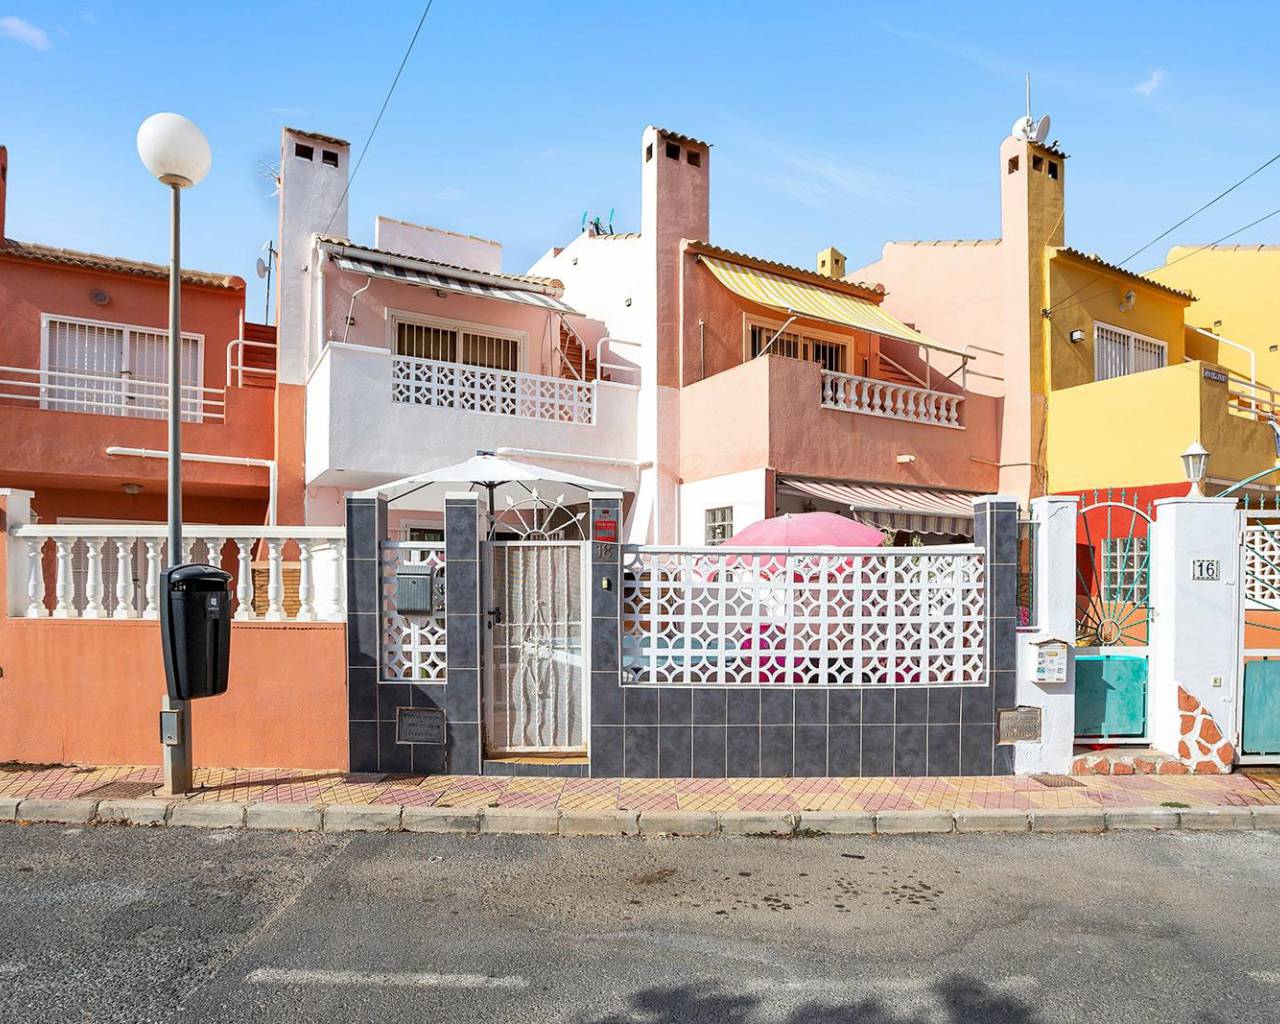 Renovated townhouse for sale in the popular residential area “Los Frutales” in Torrevieja.